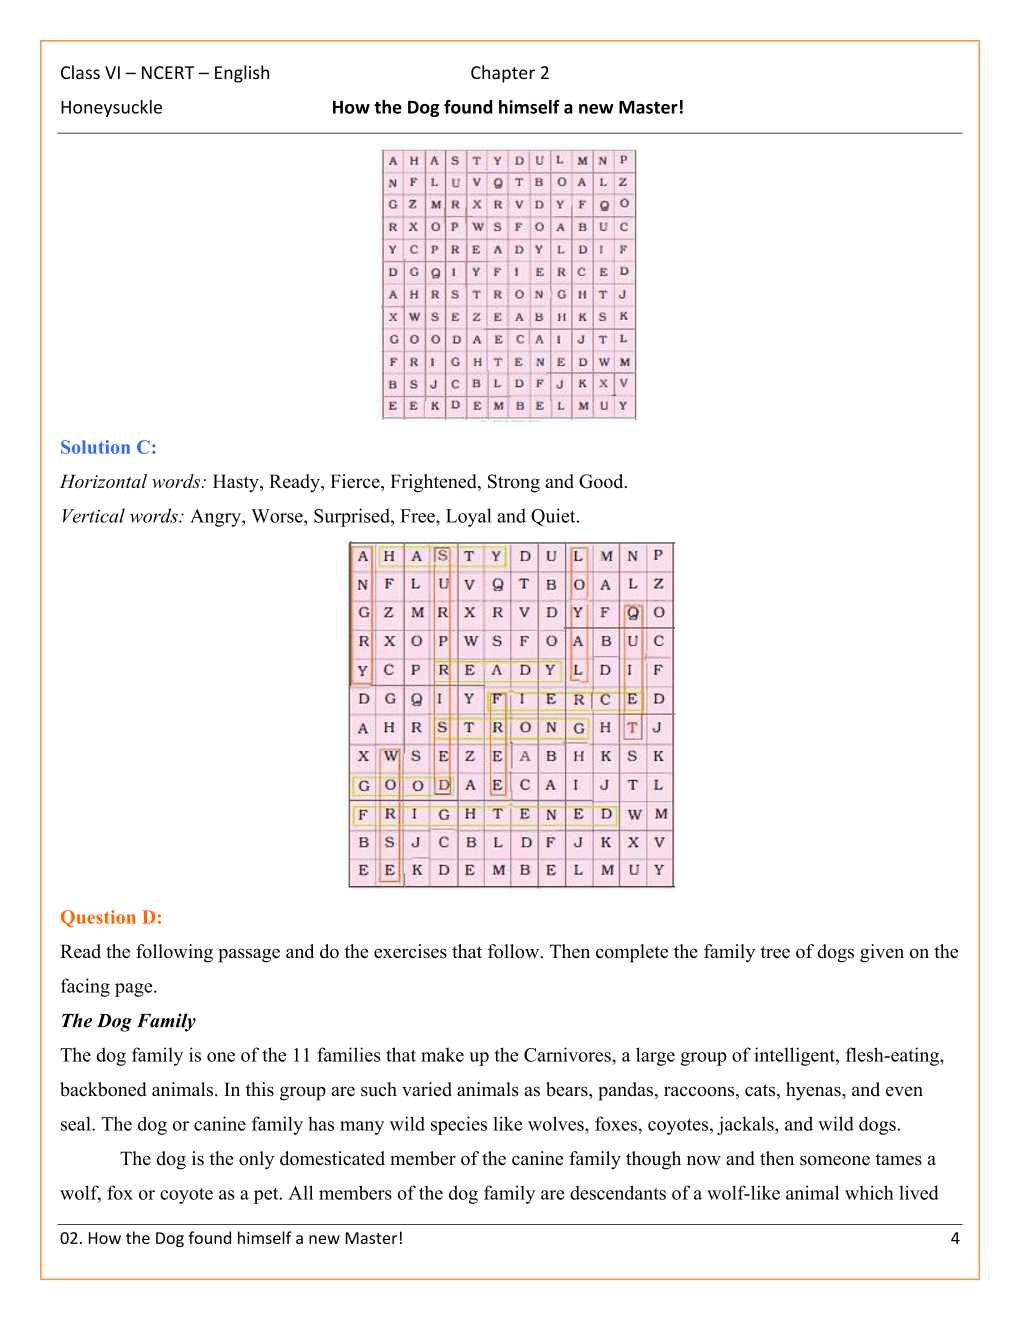 NCERT Solutions For Class 6 English Honeysuckle Chapter 2